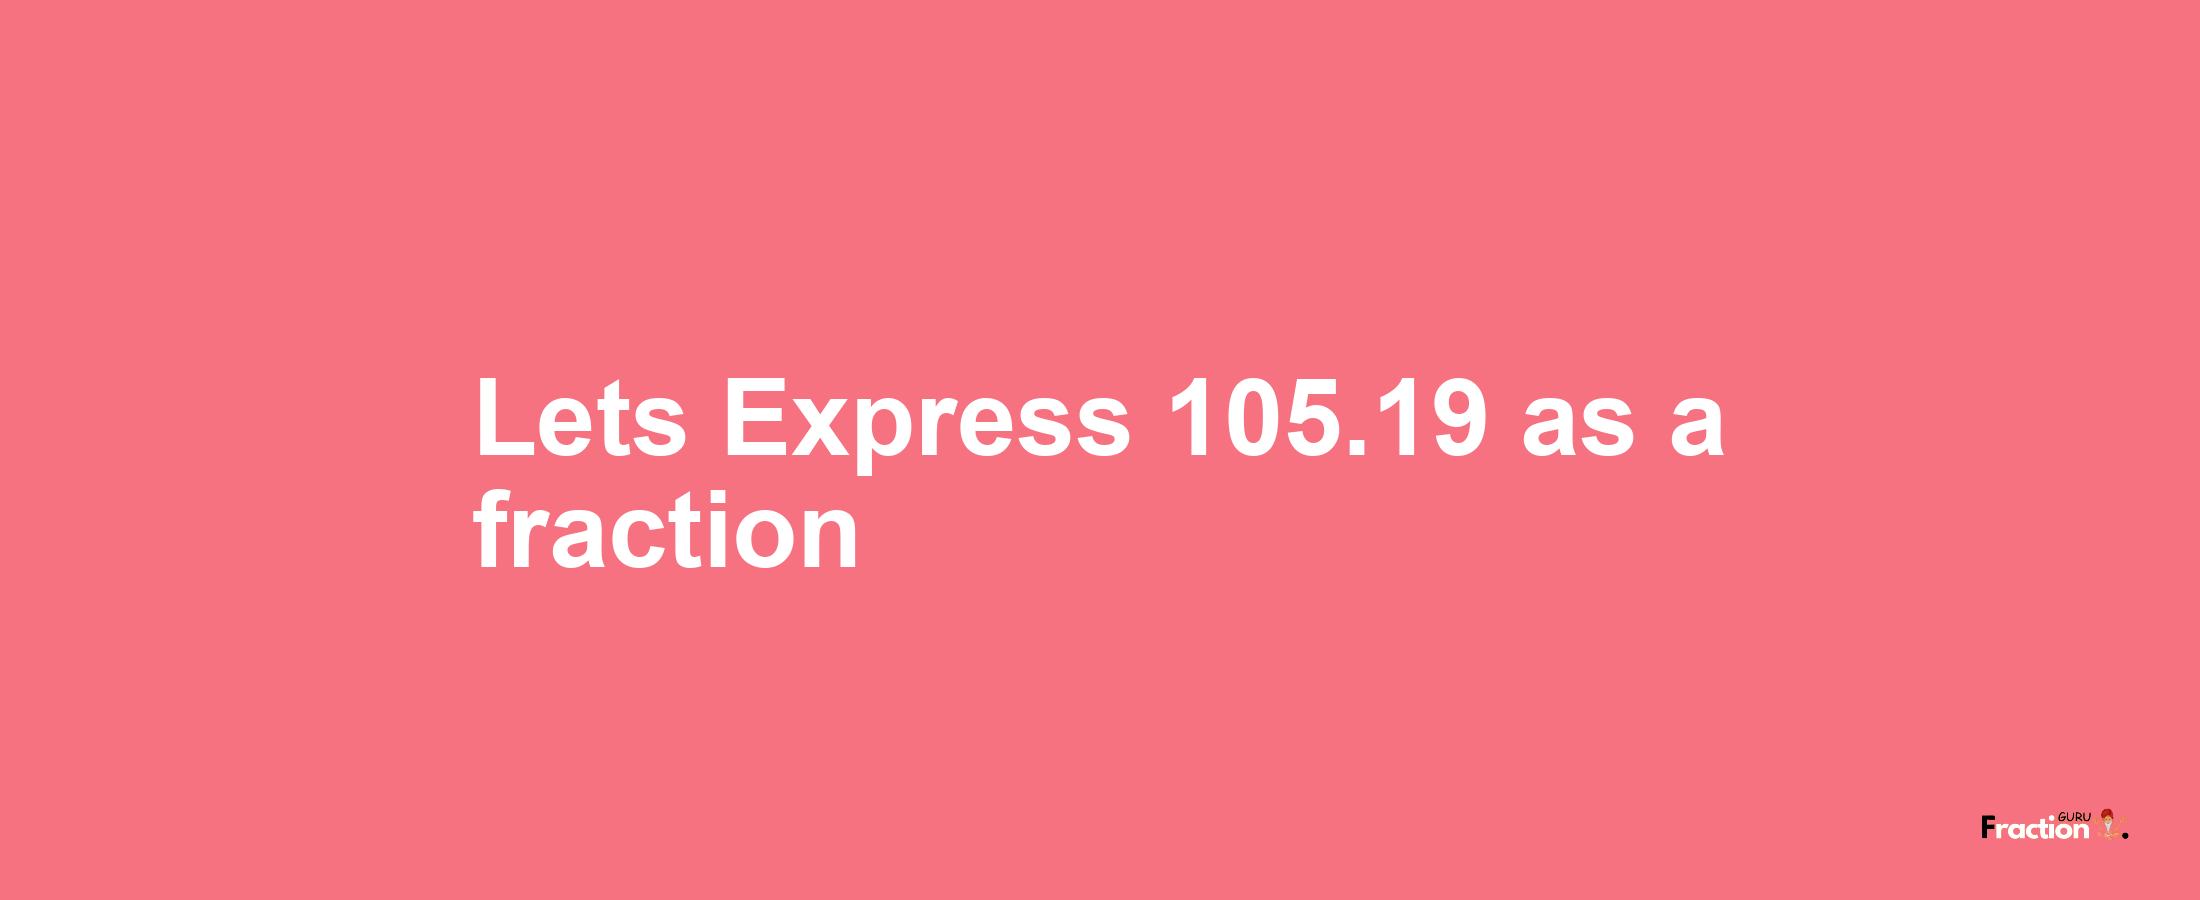 Lets Express 105.19 as afraction